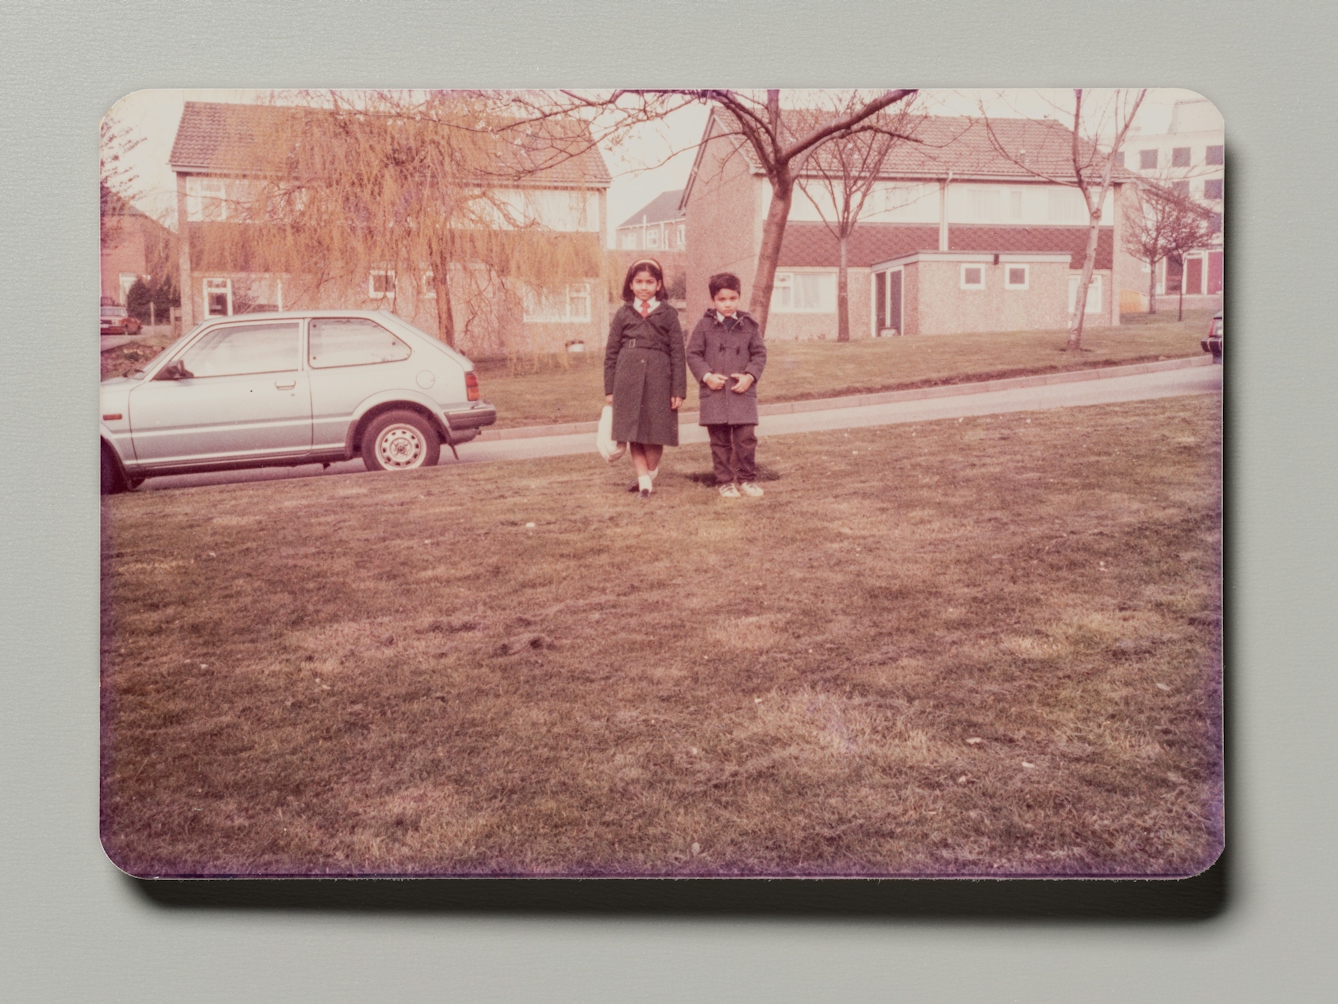 Photograph of a family photographic print resting on a grey background. The photo shows a young girl and boy in school uniform, standing on a grassy lawn in front of a 1960 housing estate.